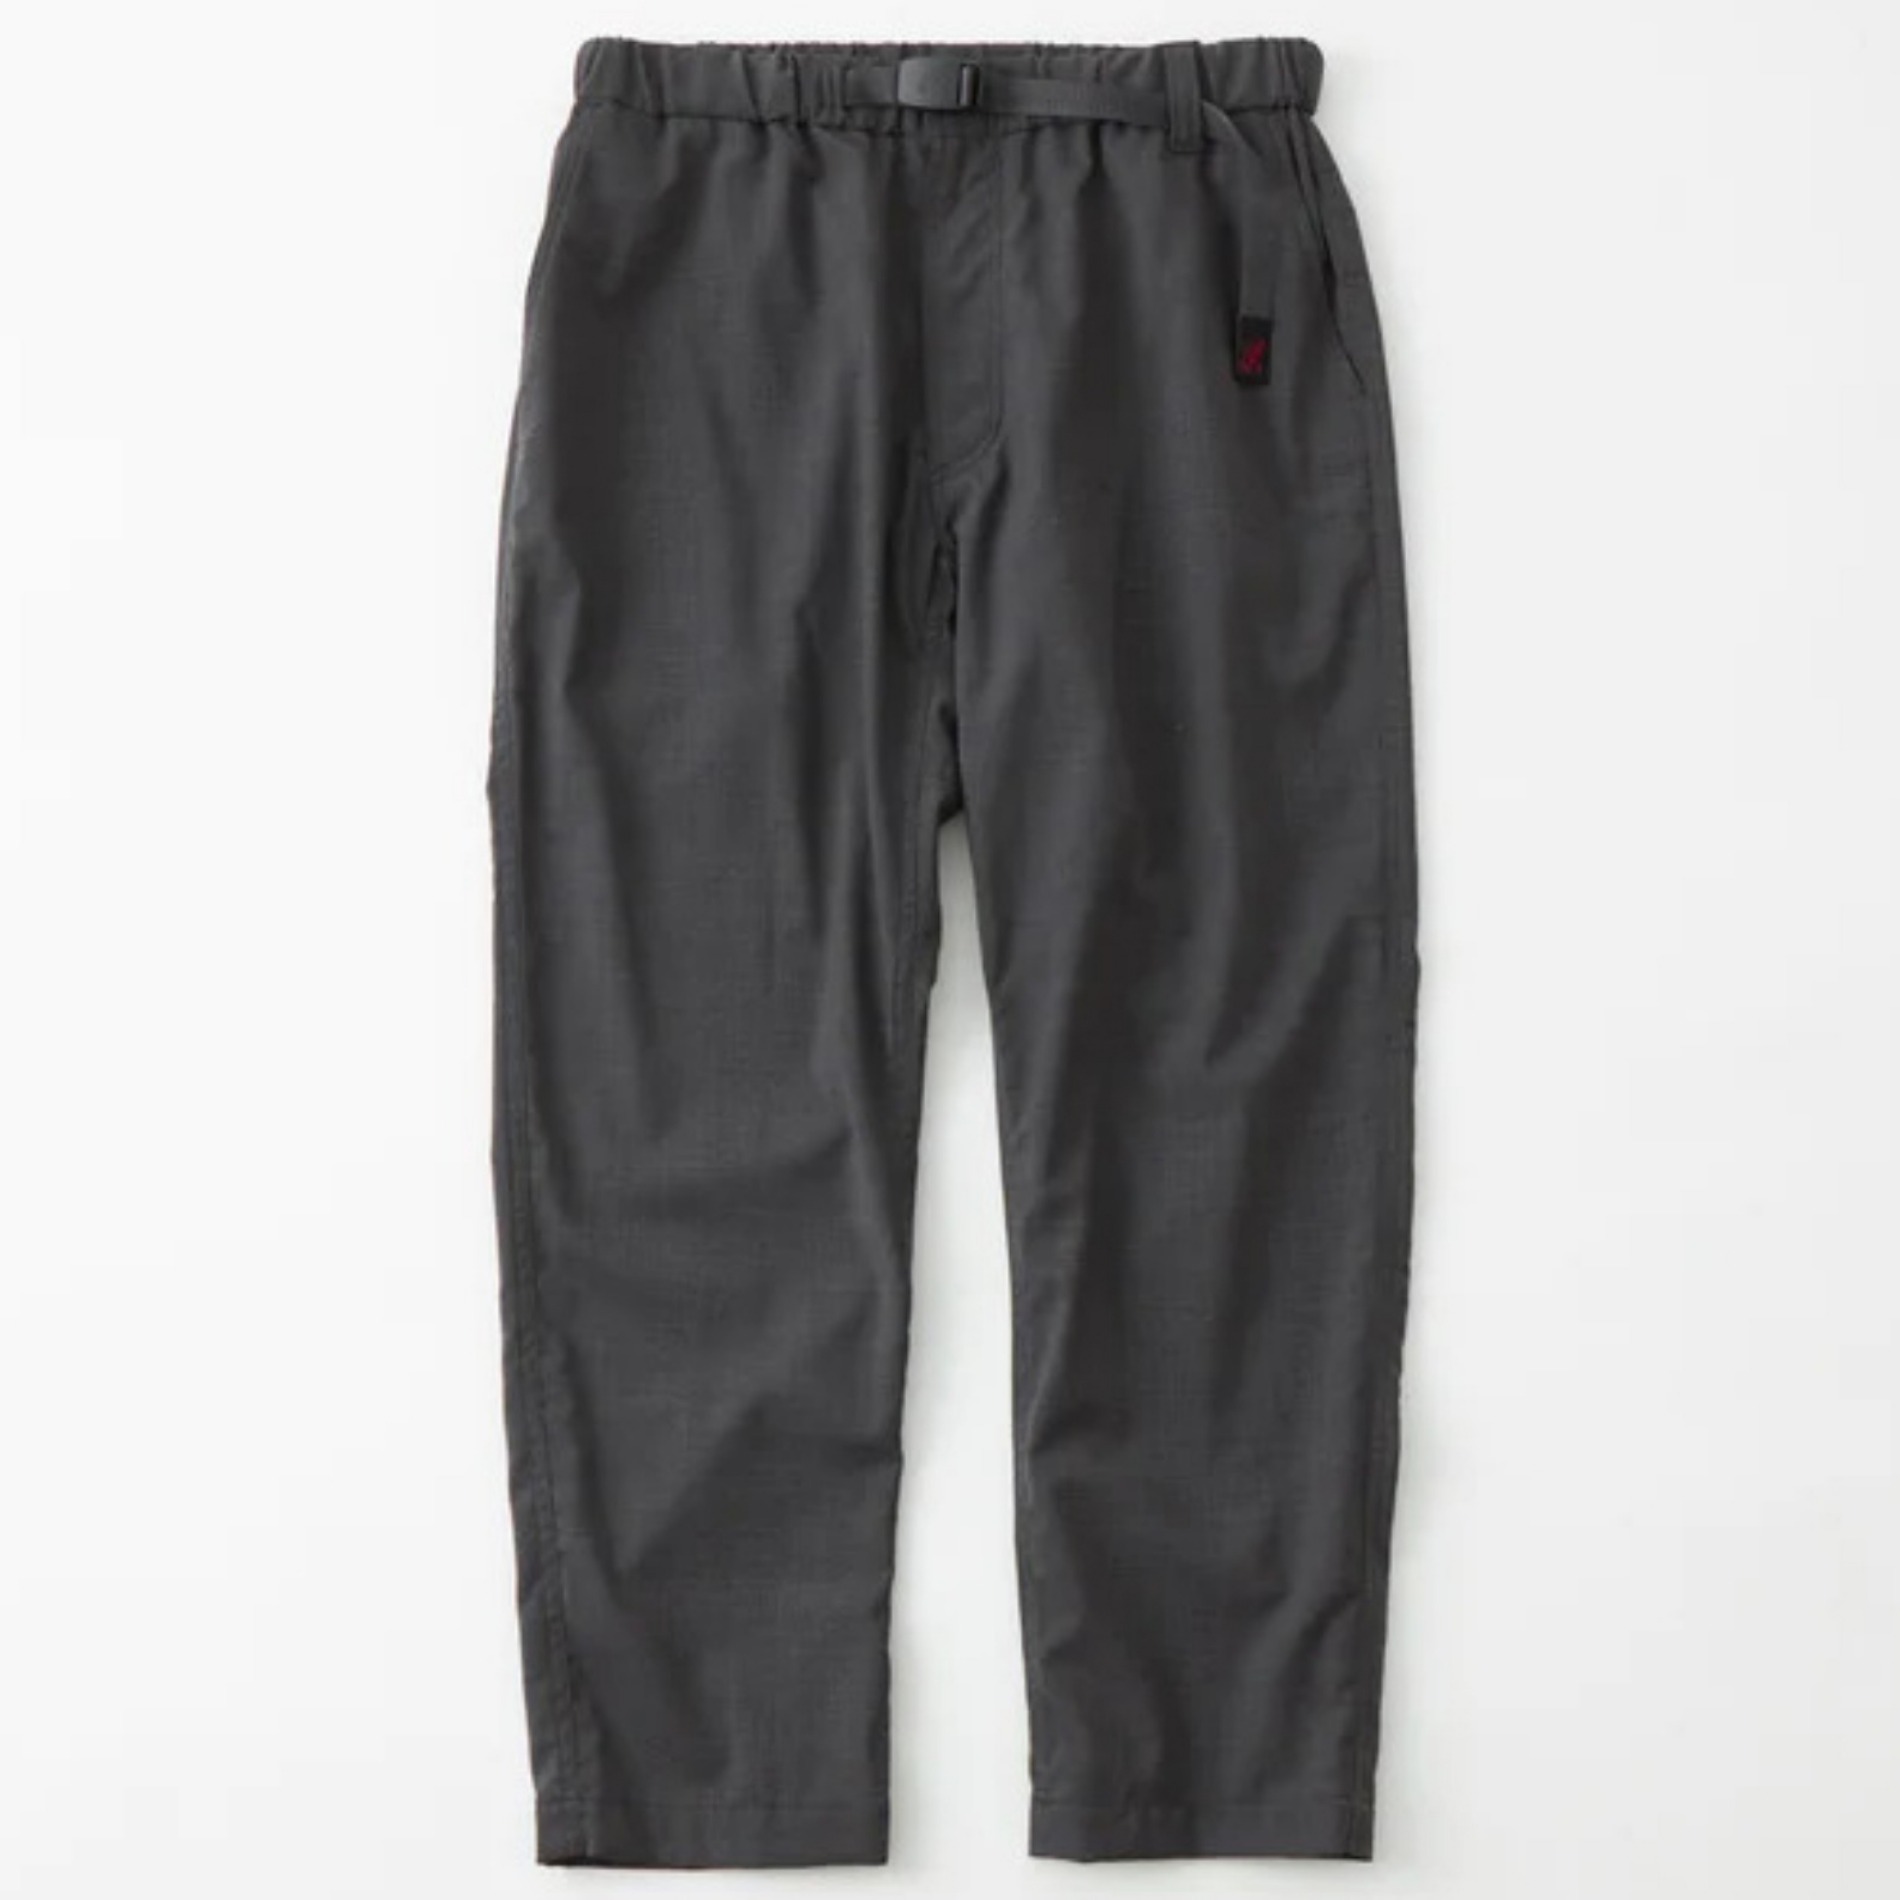 WHITE MOUNTAINEERING X GRAMICCI TECH WOOLLY TAPERED PANTS CHARCOAL